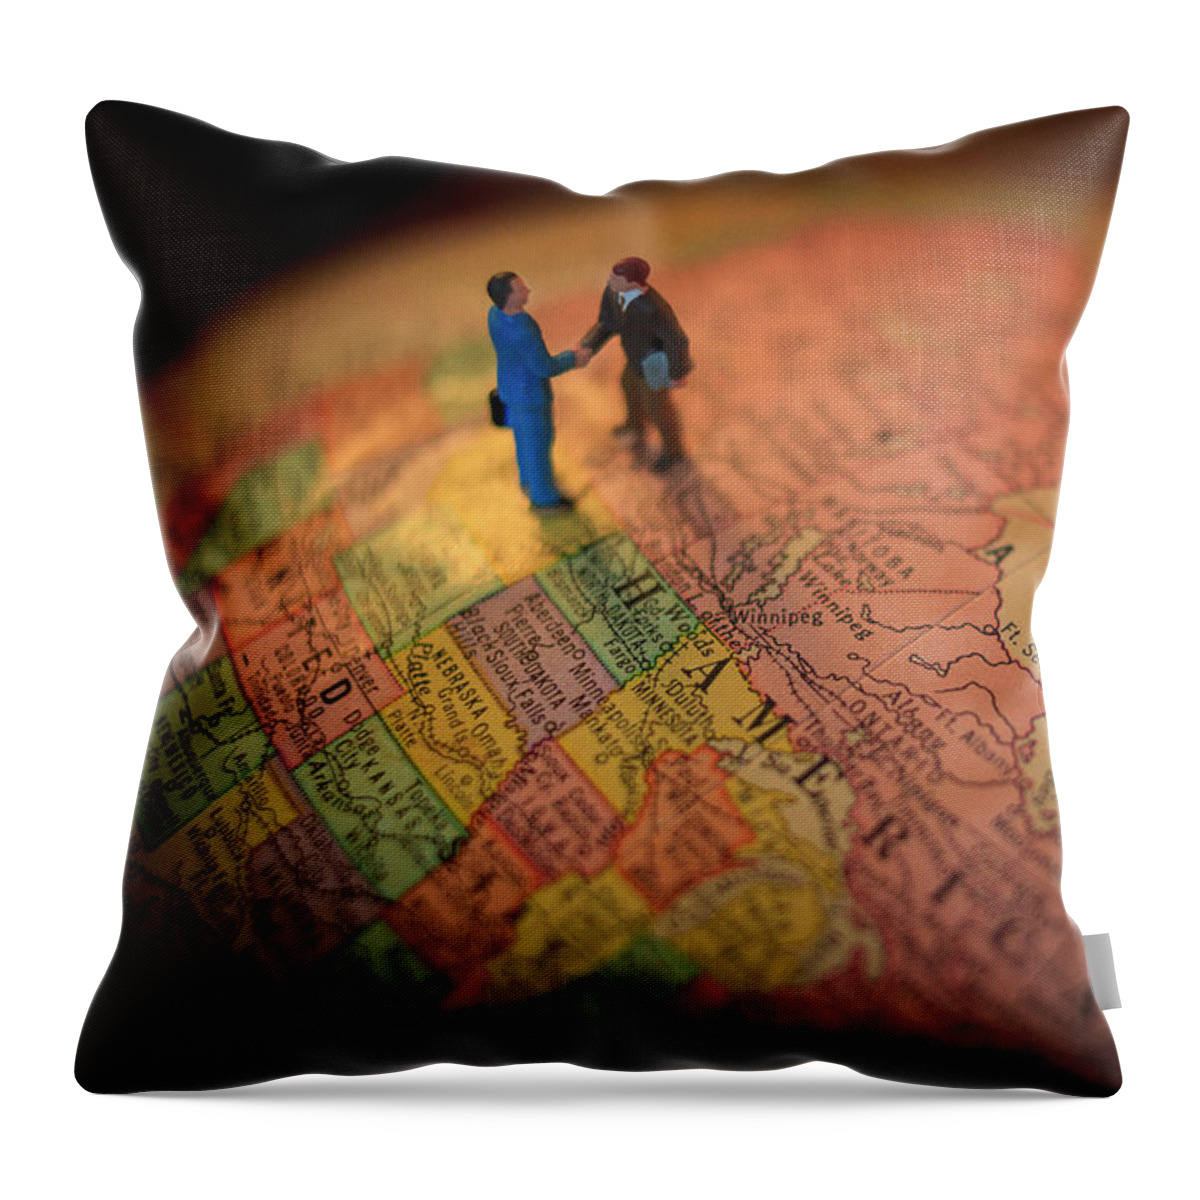 World Throw Pillow featuring the photograph The Handshake by Craig J Satterlee